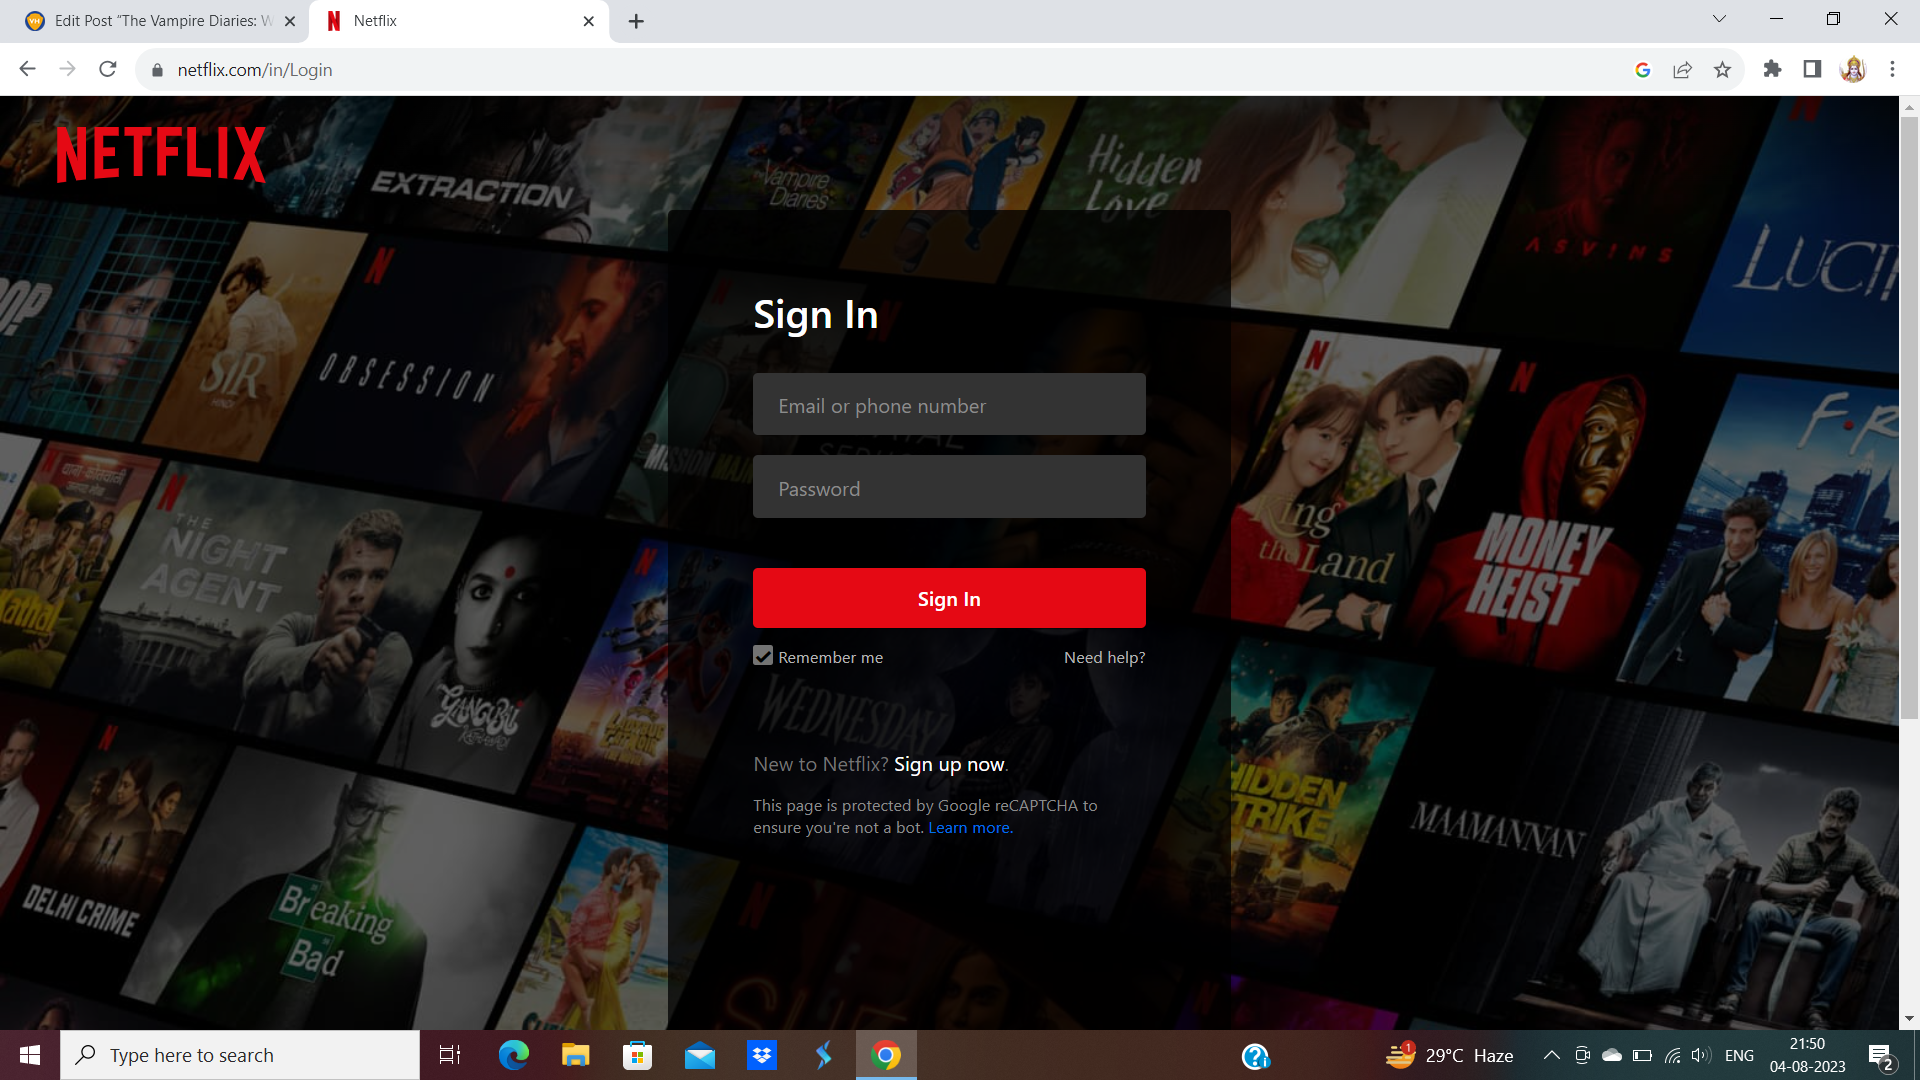 Login or Signup With Netflix